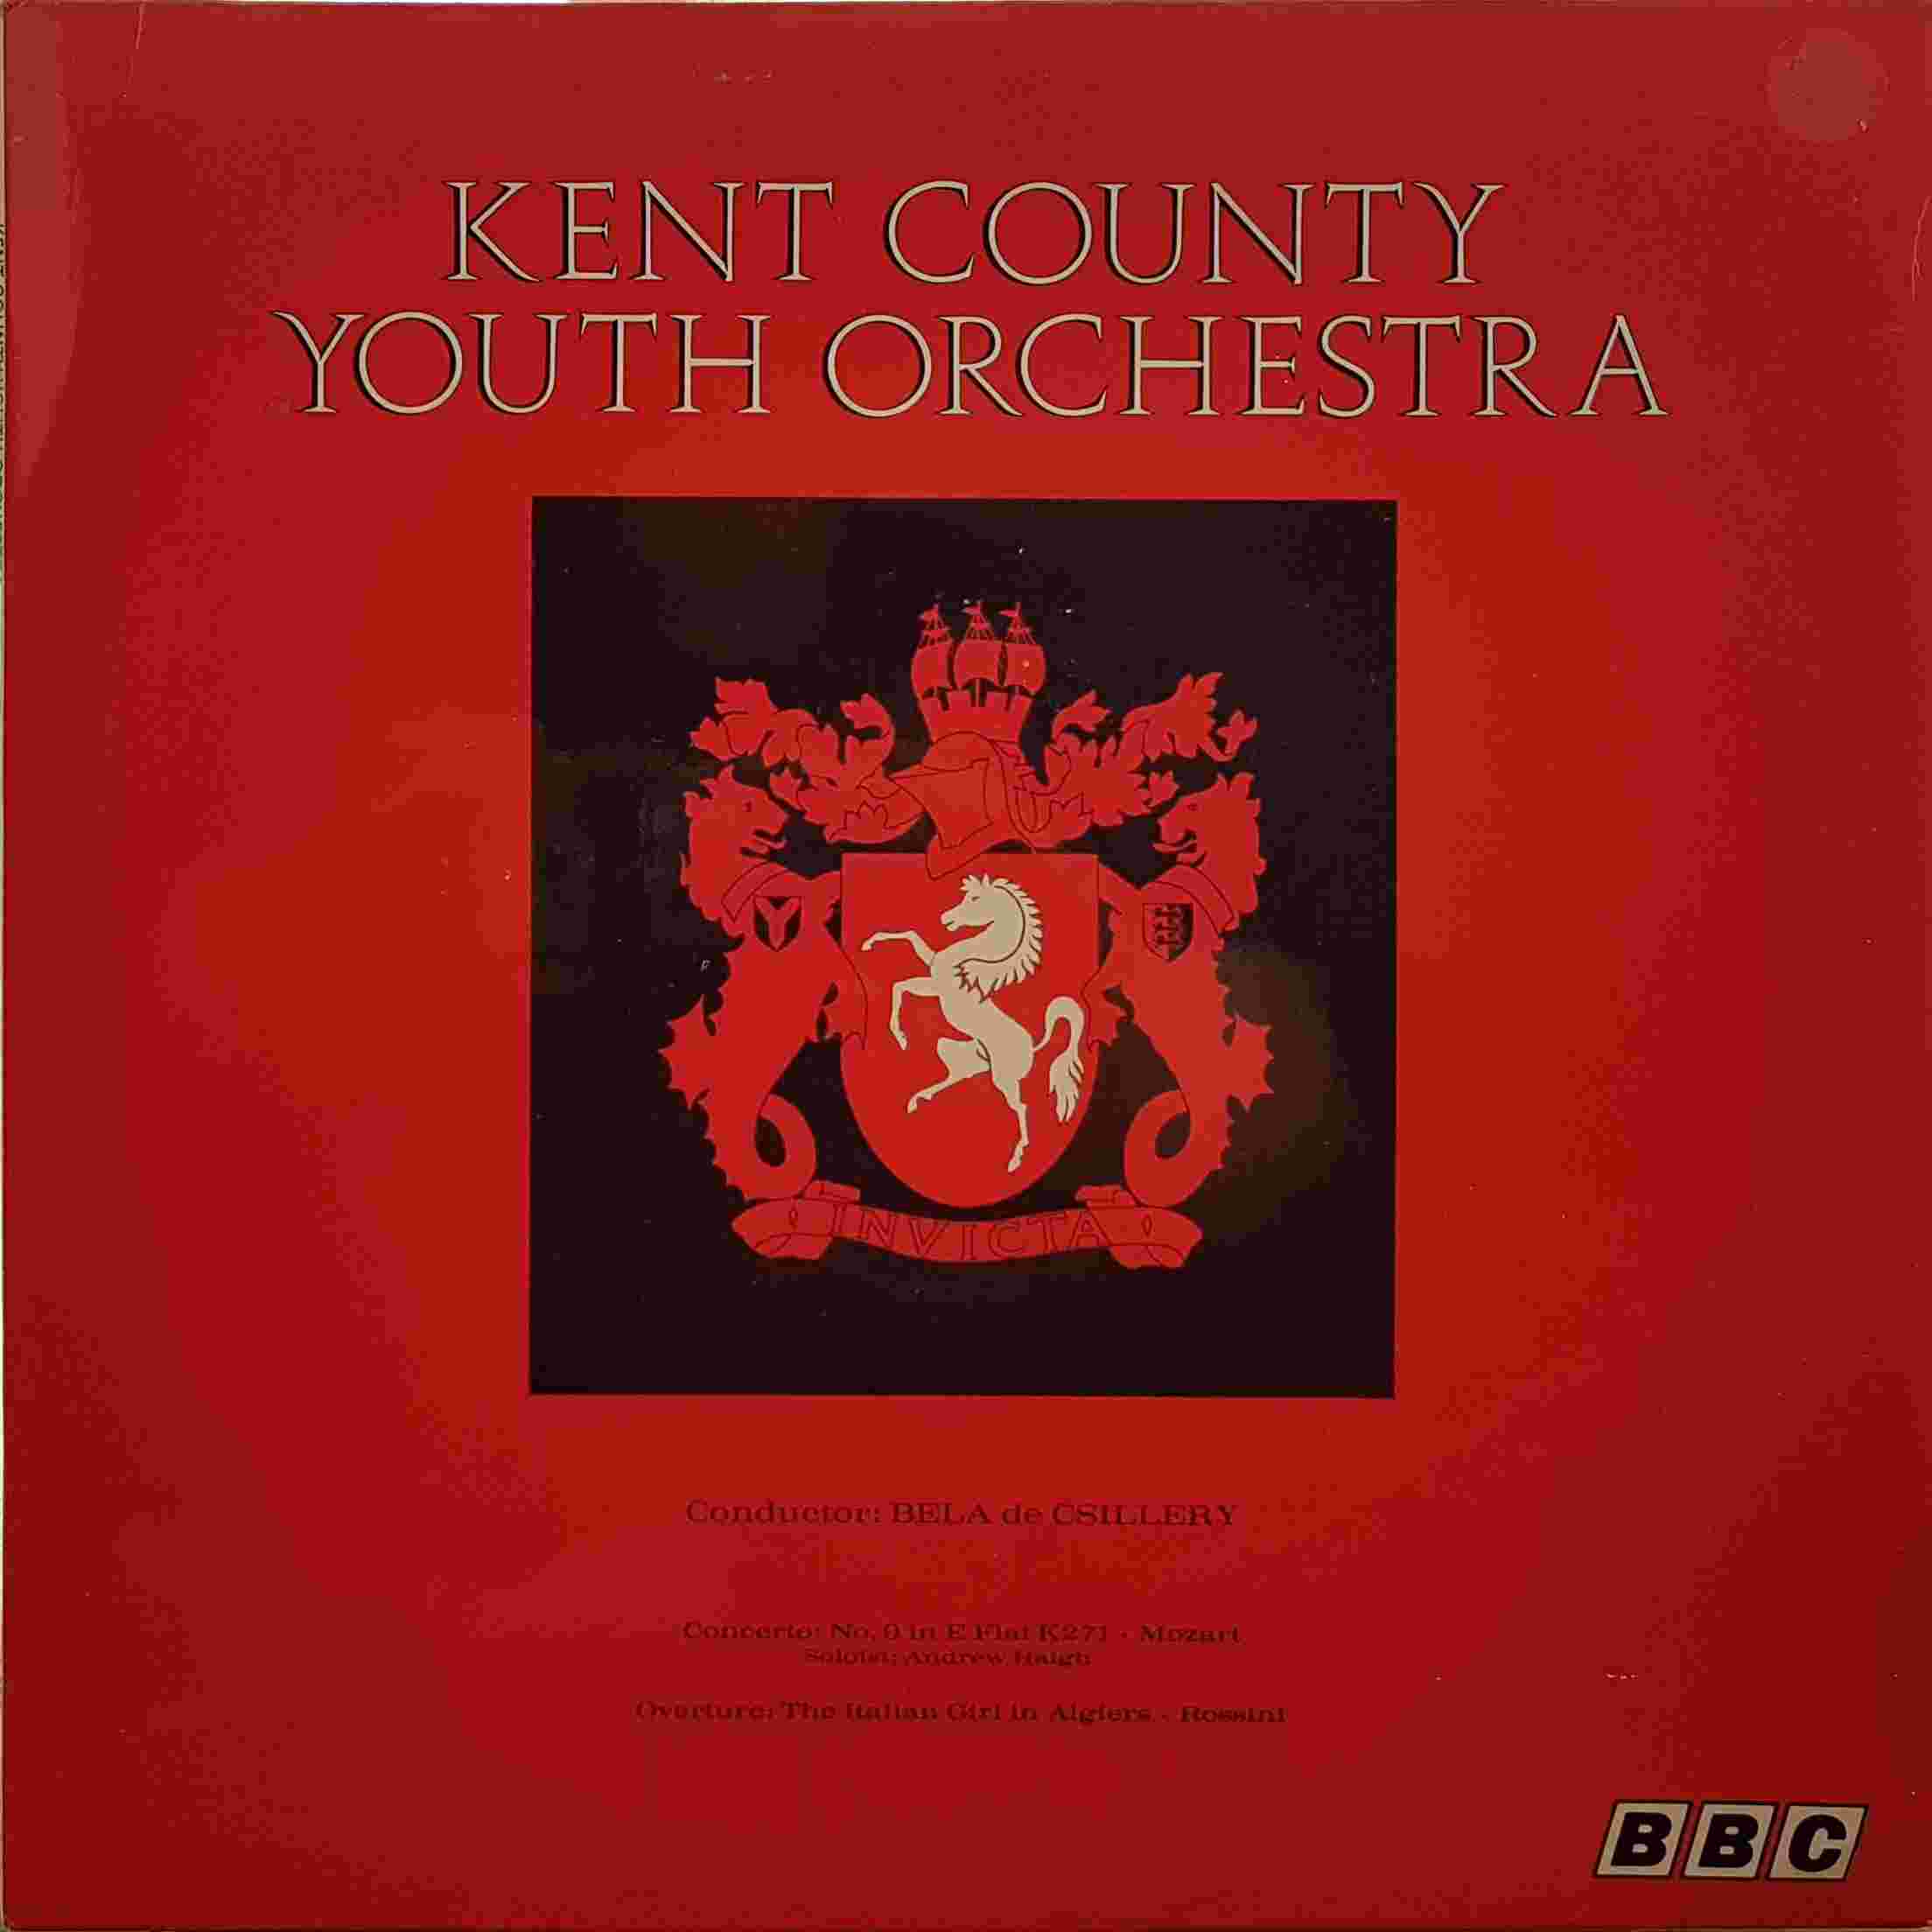 Picture of REB 62 Kent County Youth Orchestra by artist Various from the BBC albums - Records and Tapes library